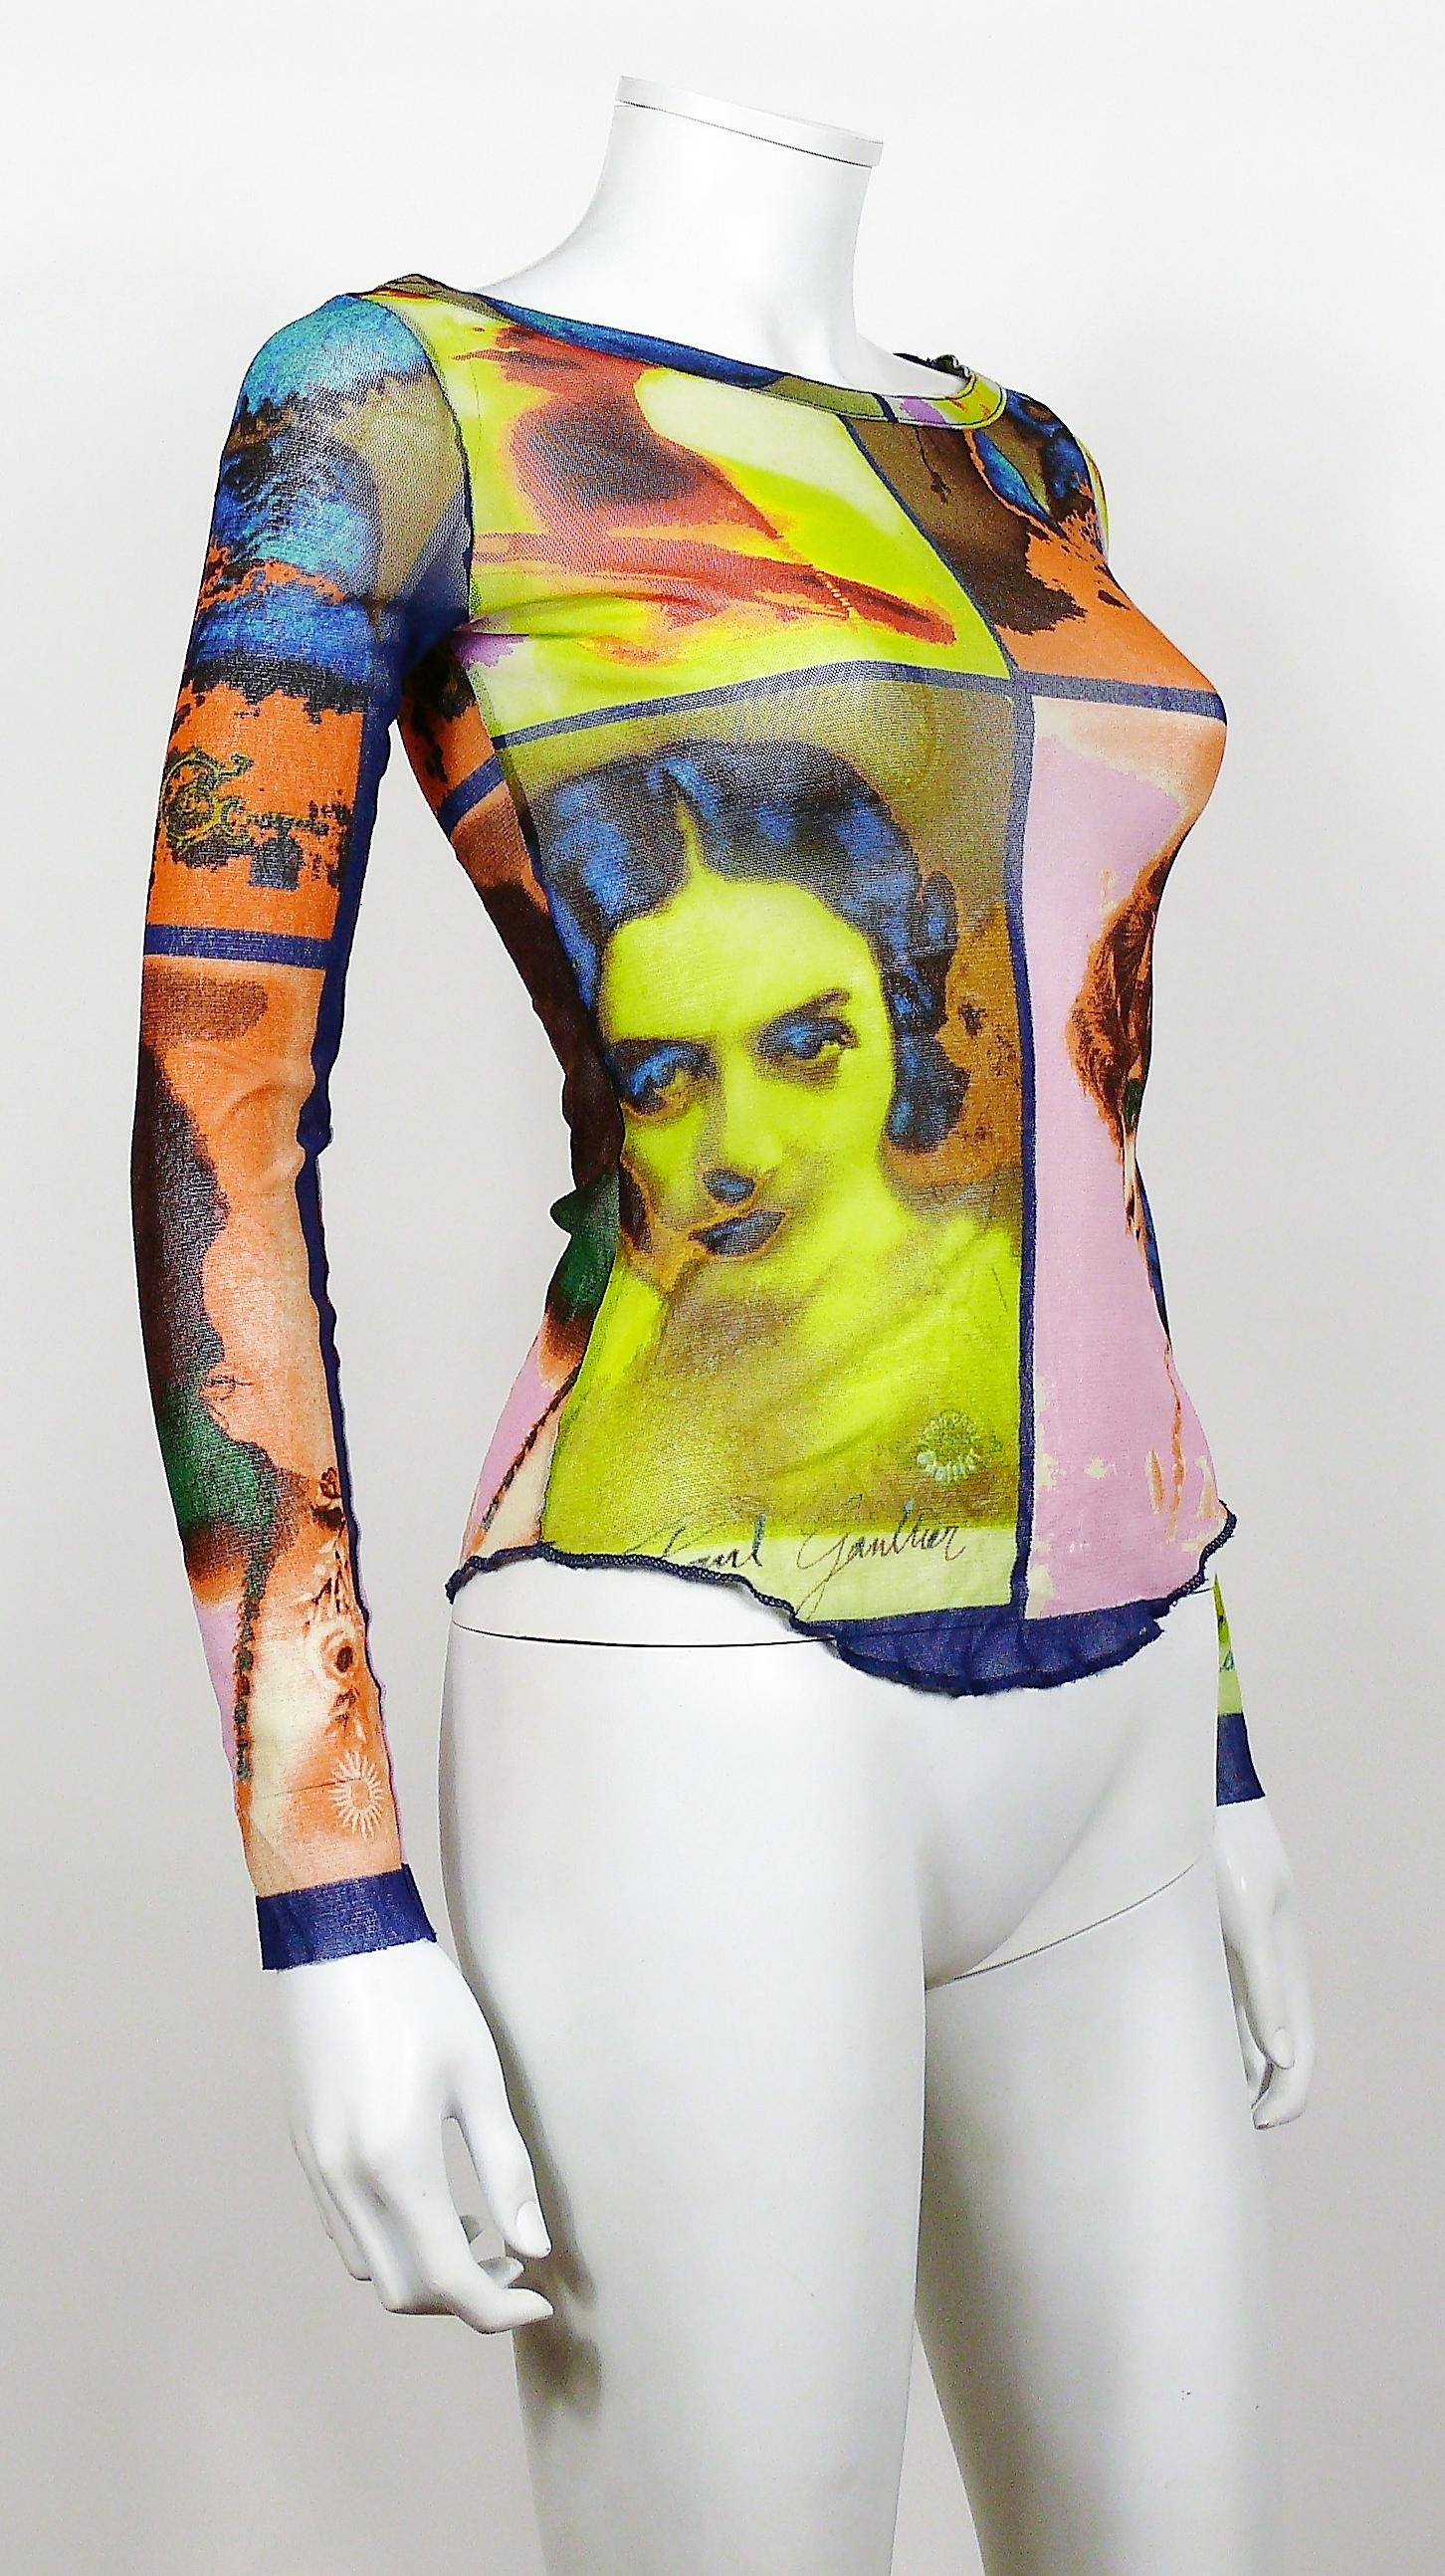 JEAN PAUL GAULTIER vintage portrait photo print Fuzzi mesh stretchy top.

Label reads JEAN PAUL GAULTIER Soleil.

Size label reads : S.
Please refer to measurements.

Composition label reads : 100 % nylon.
FUZZI S.p.a Made in Italy.

Indicative